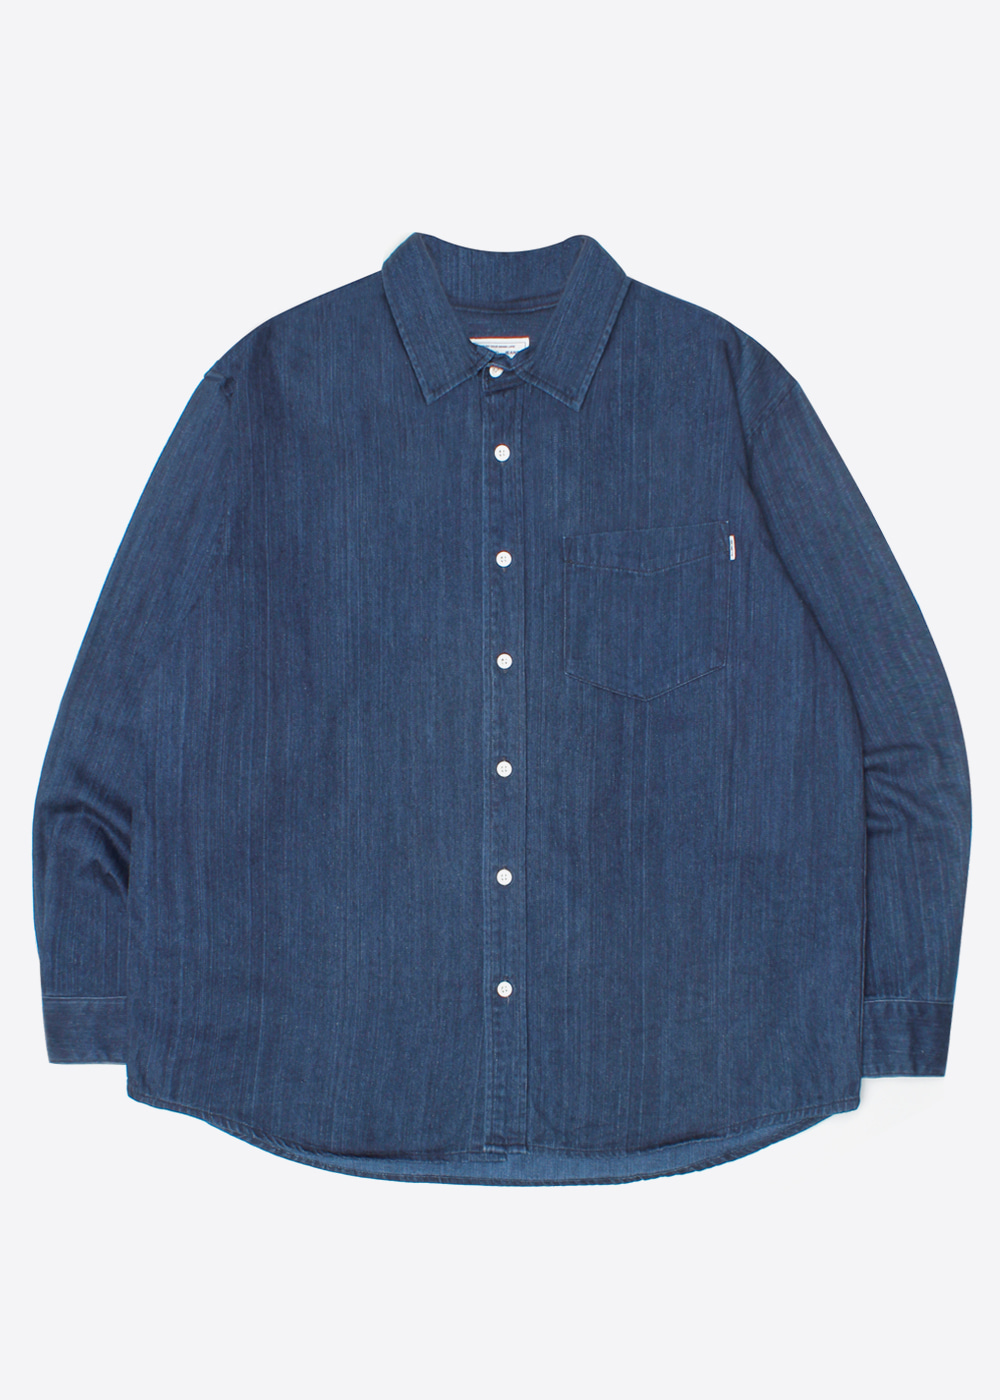 NIKO AND’over fit’garmanets dining denim shirt